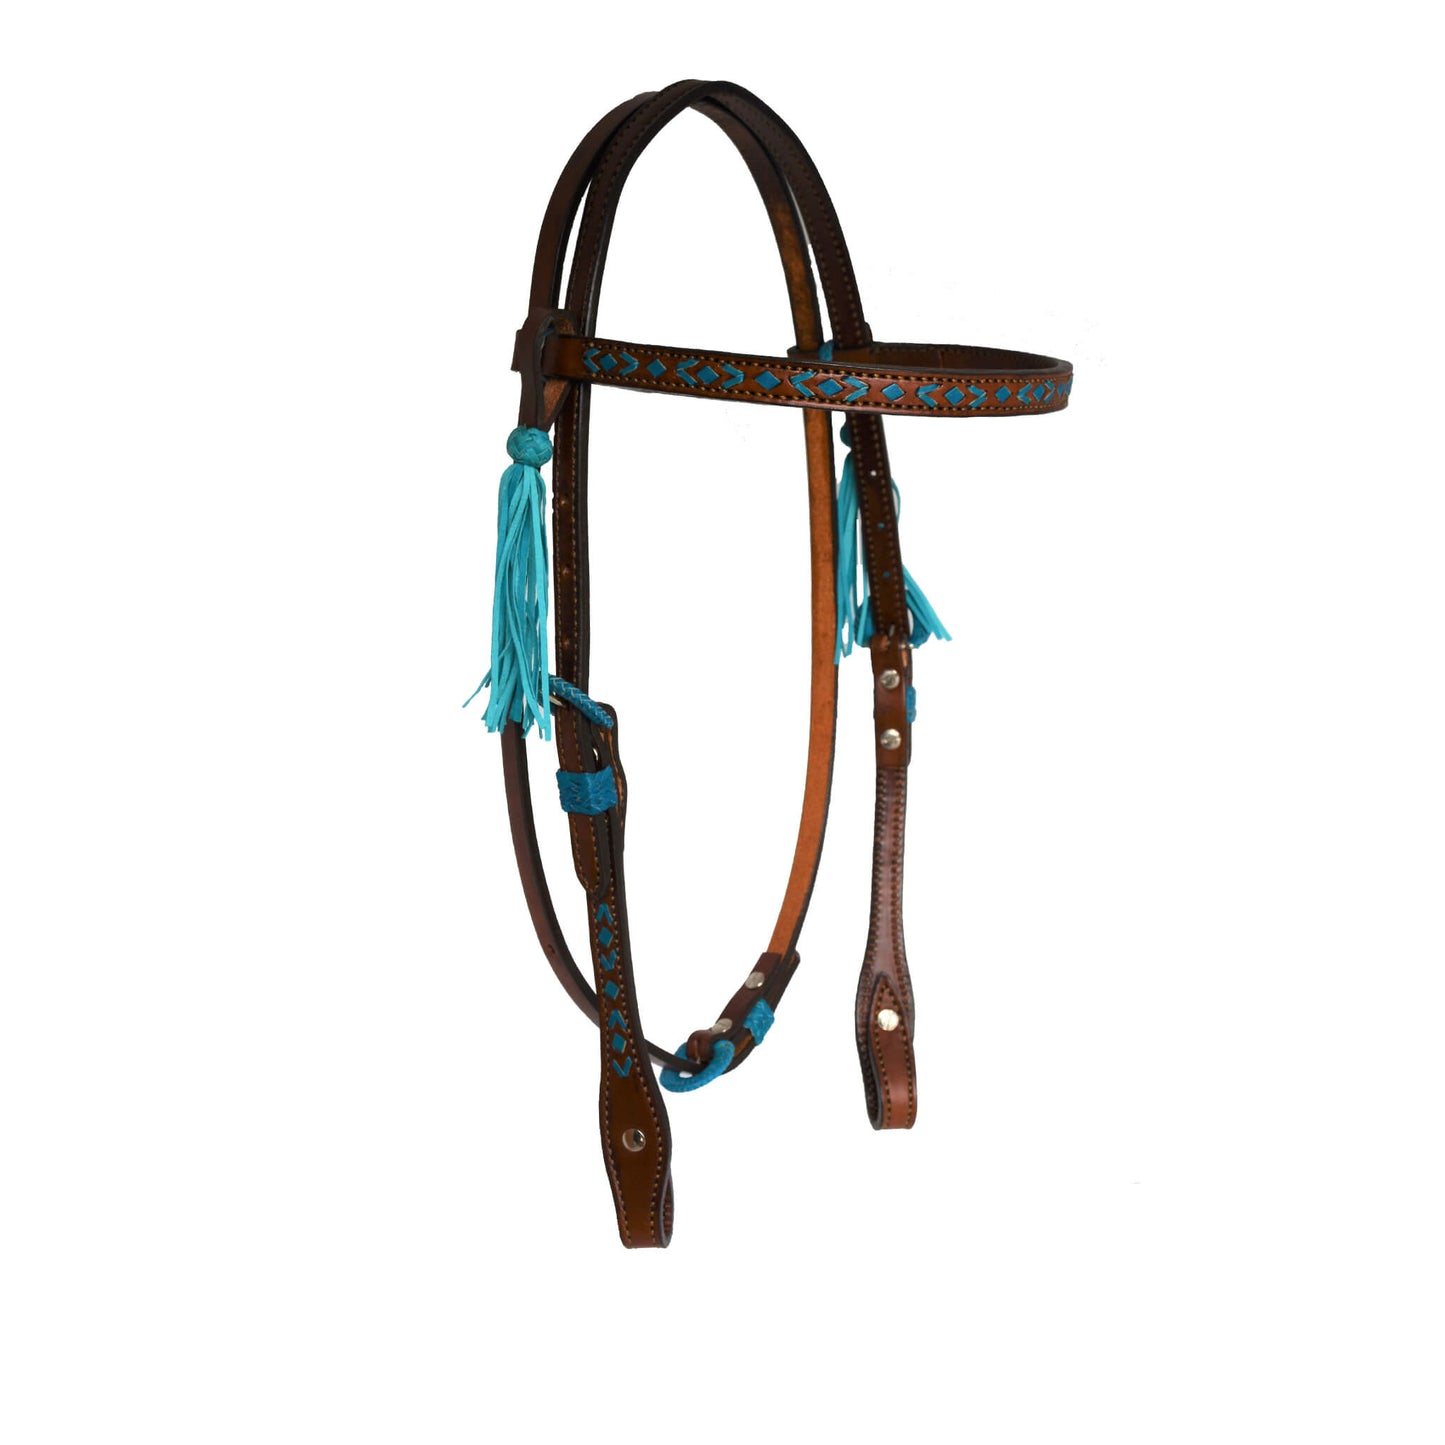 1/2" Straight browband headstall toast leather turquoise rawhide southwest design with turquoise Spanish lace hardware, braided loops and tassels. 